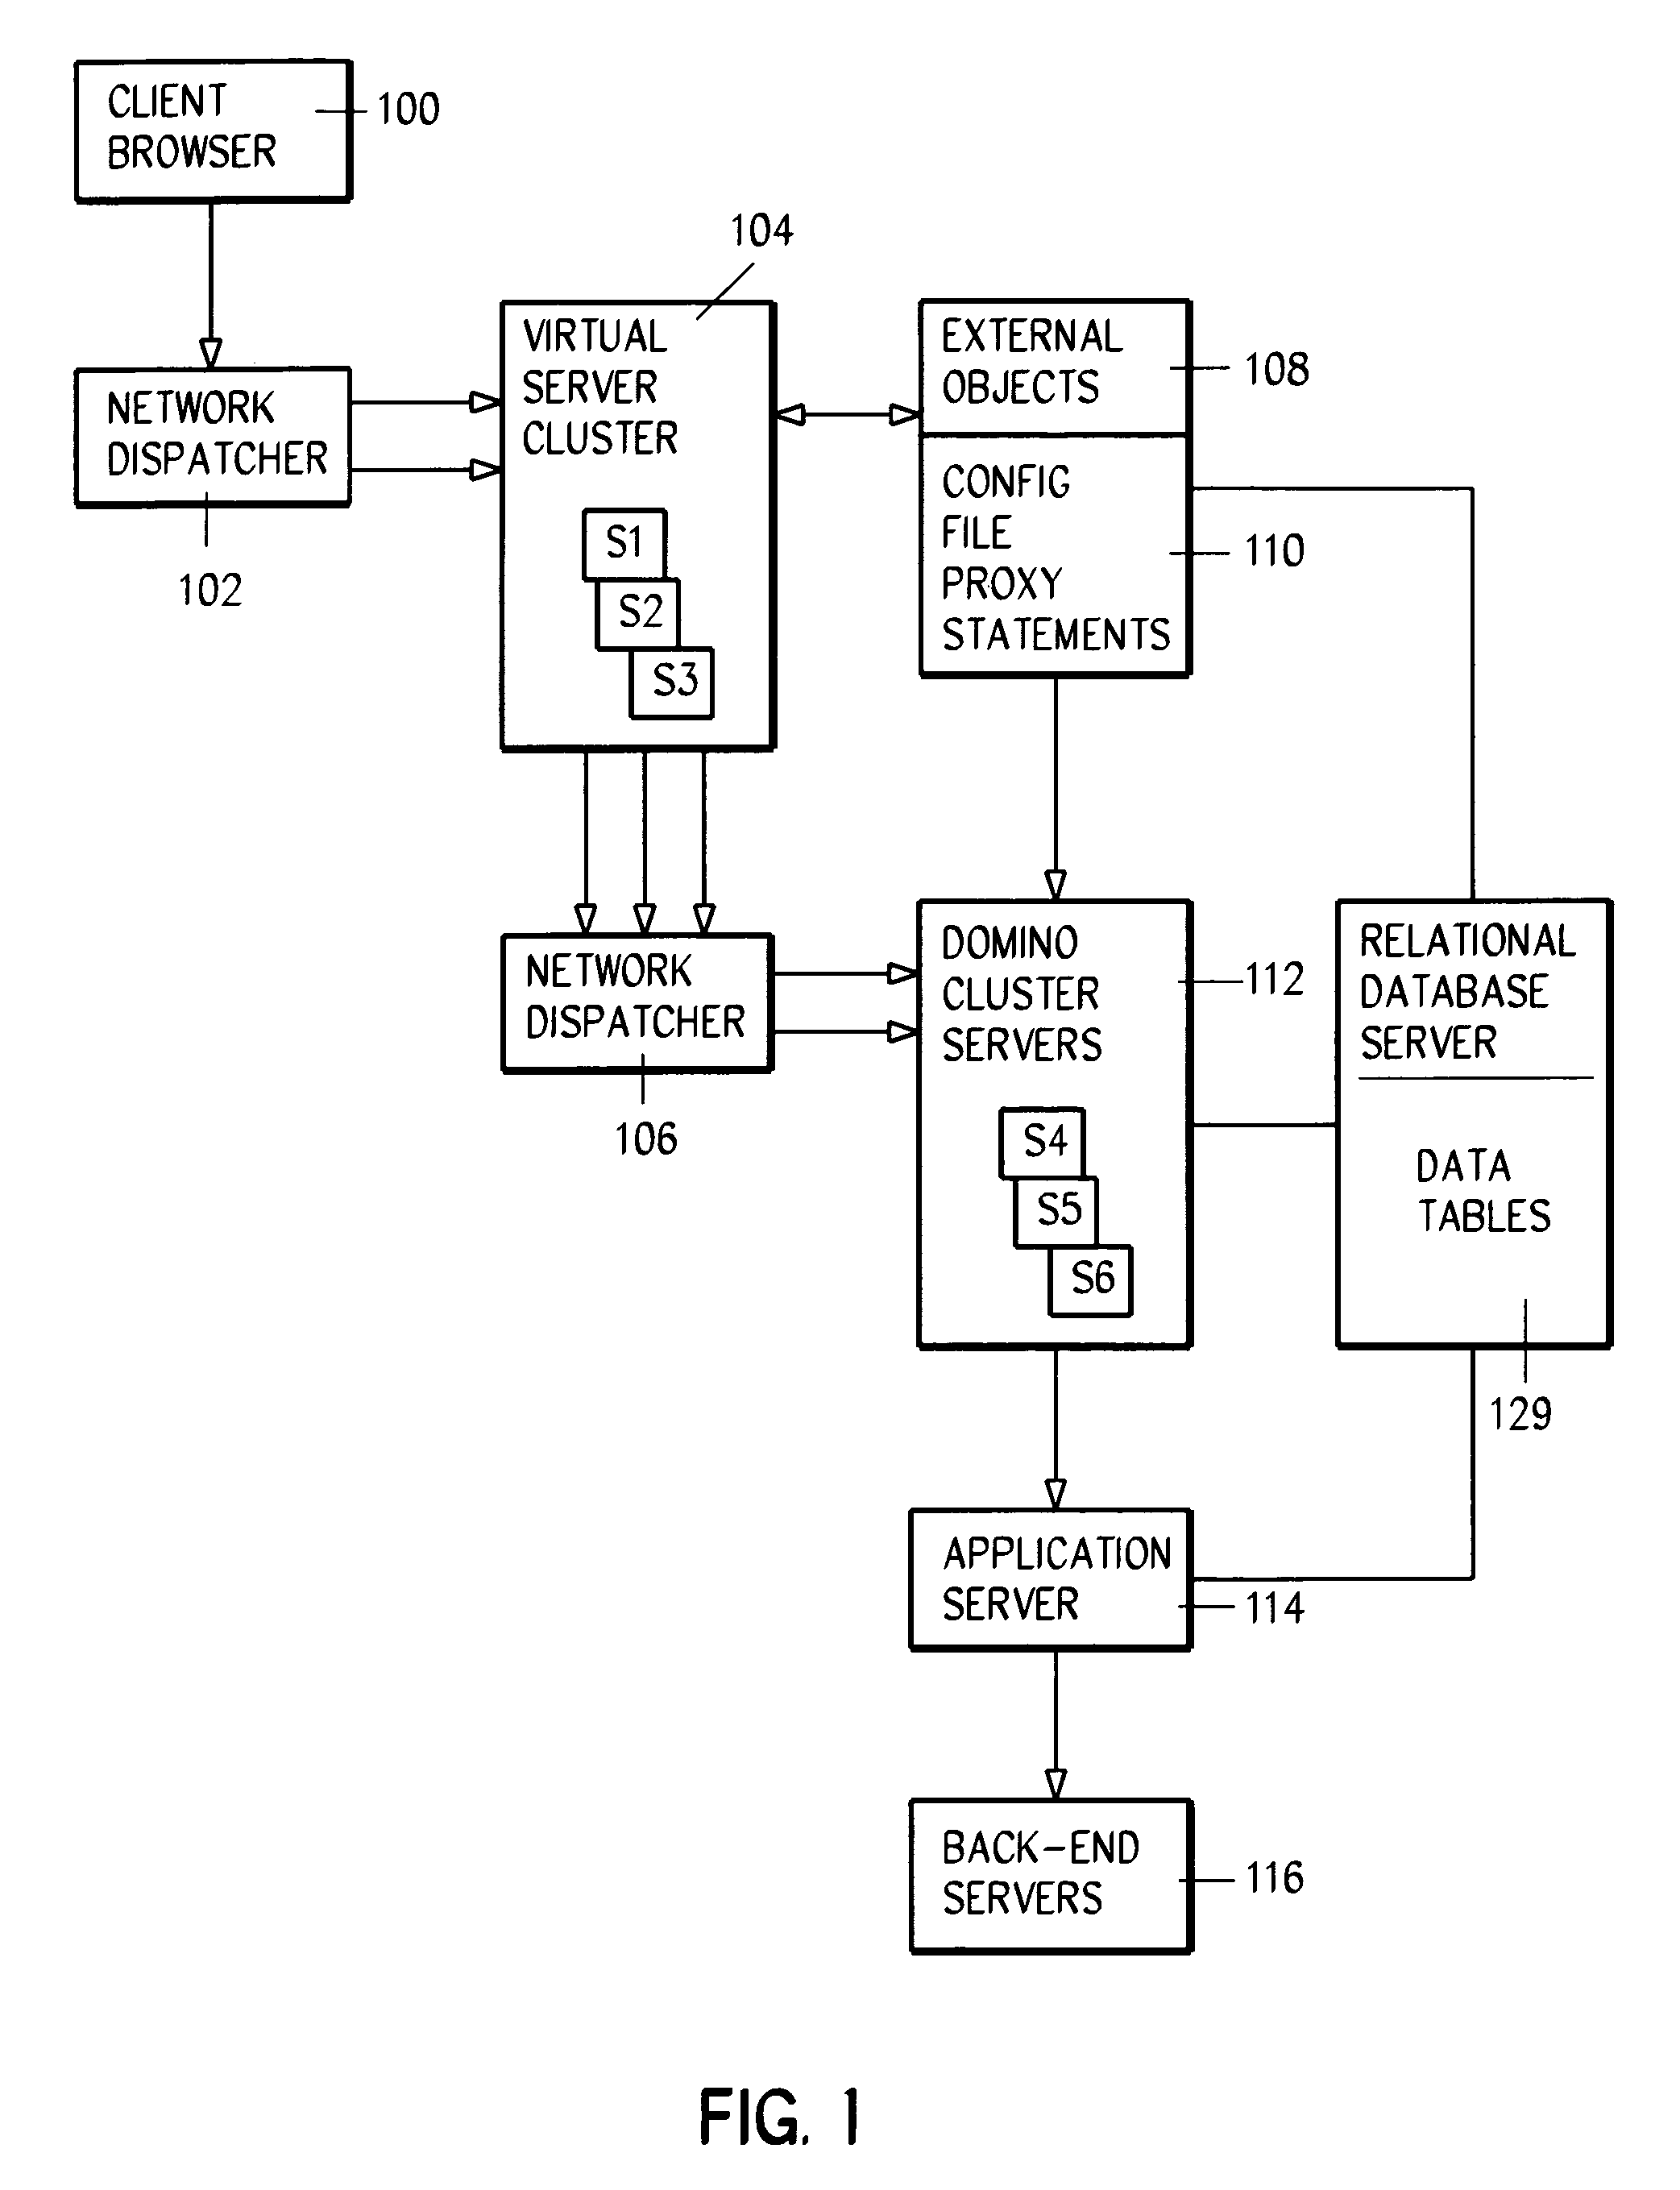 System and method for clustering servers for performance and load balancing